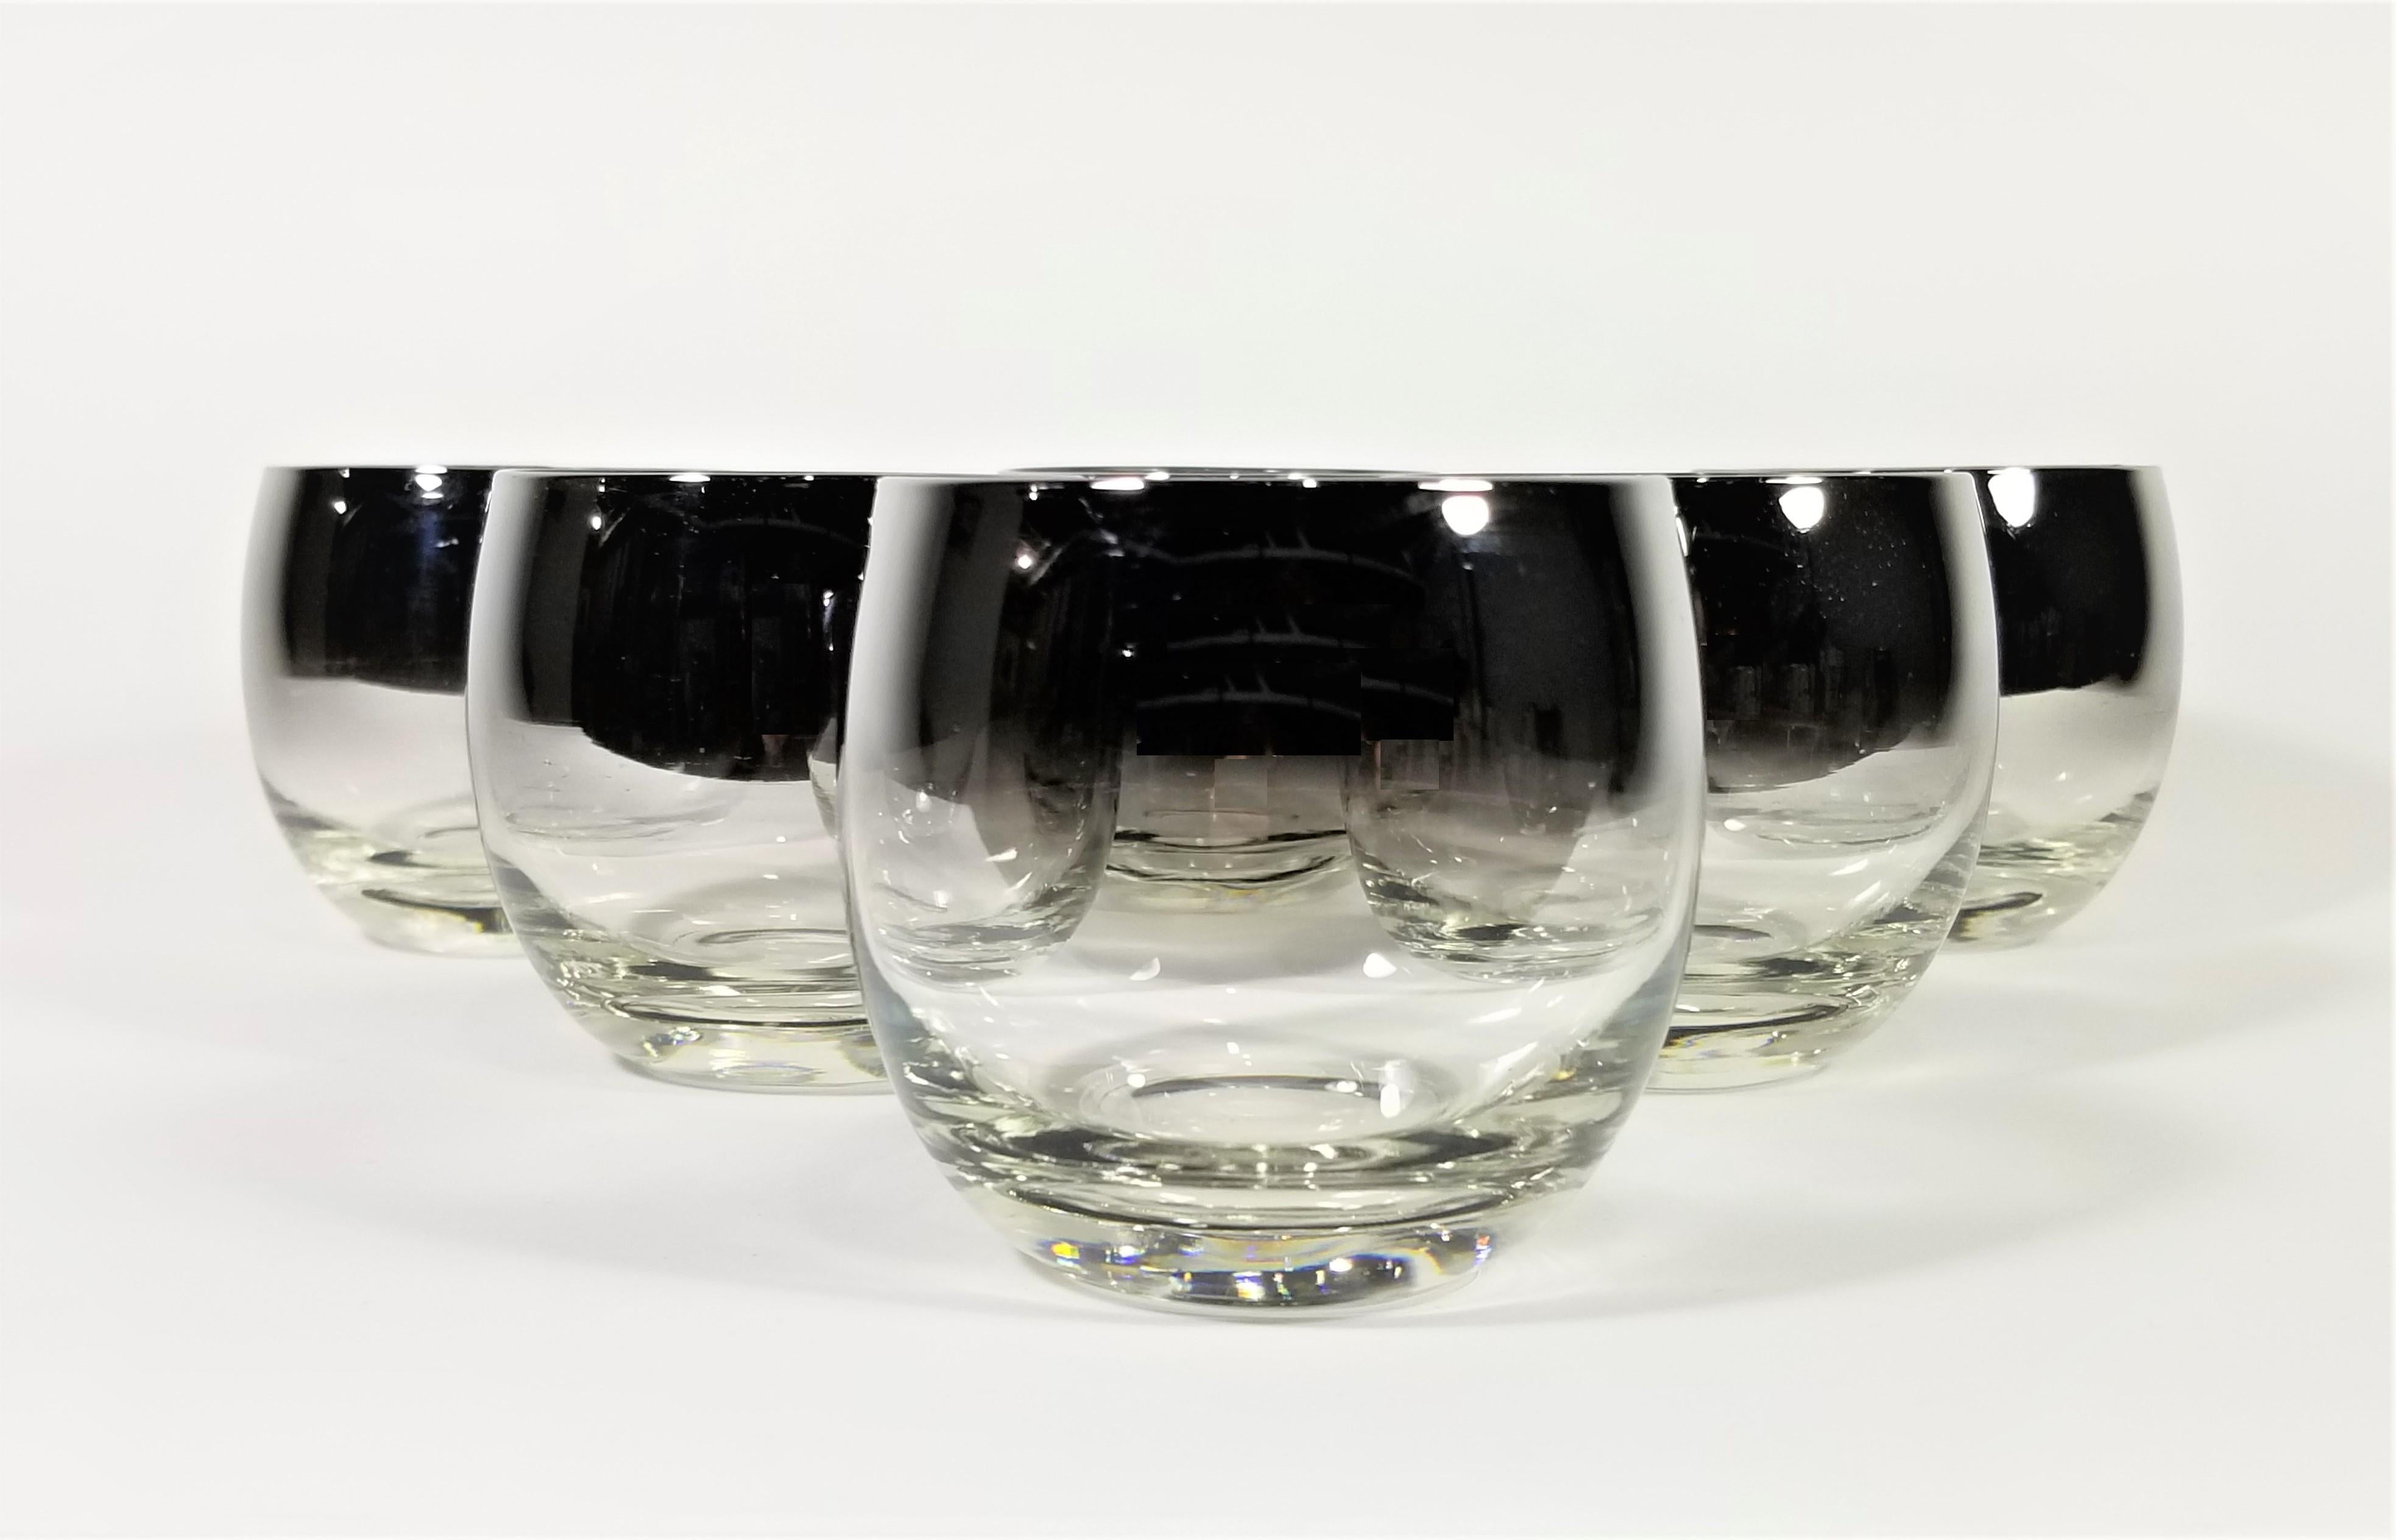 Midcentury 1960s Dorothy Thorpe glassware barware. Silver fade design. Often referred to as Roly Poly glasses due to round mod shape. We have a total of 12 being sold in 2 sets of 6. 
